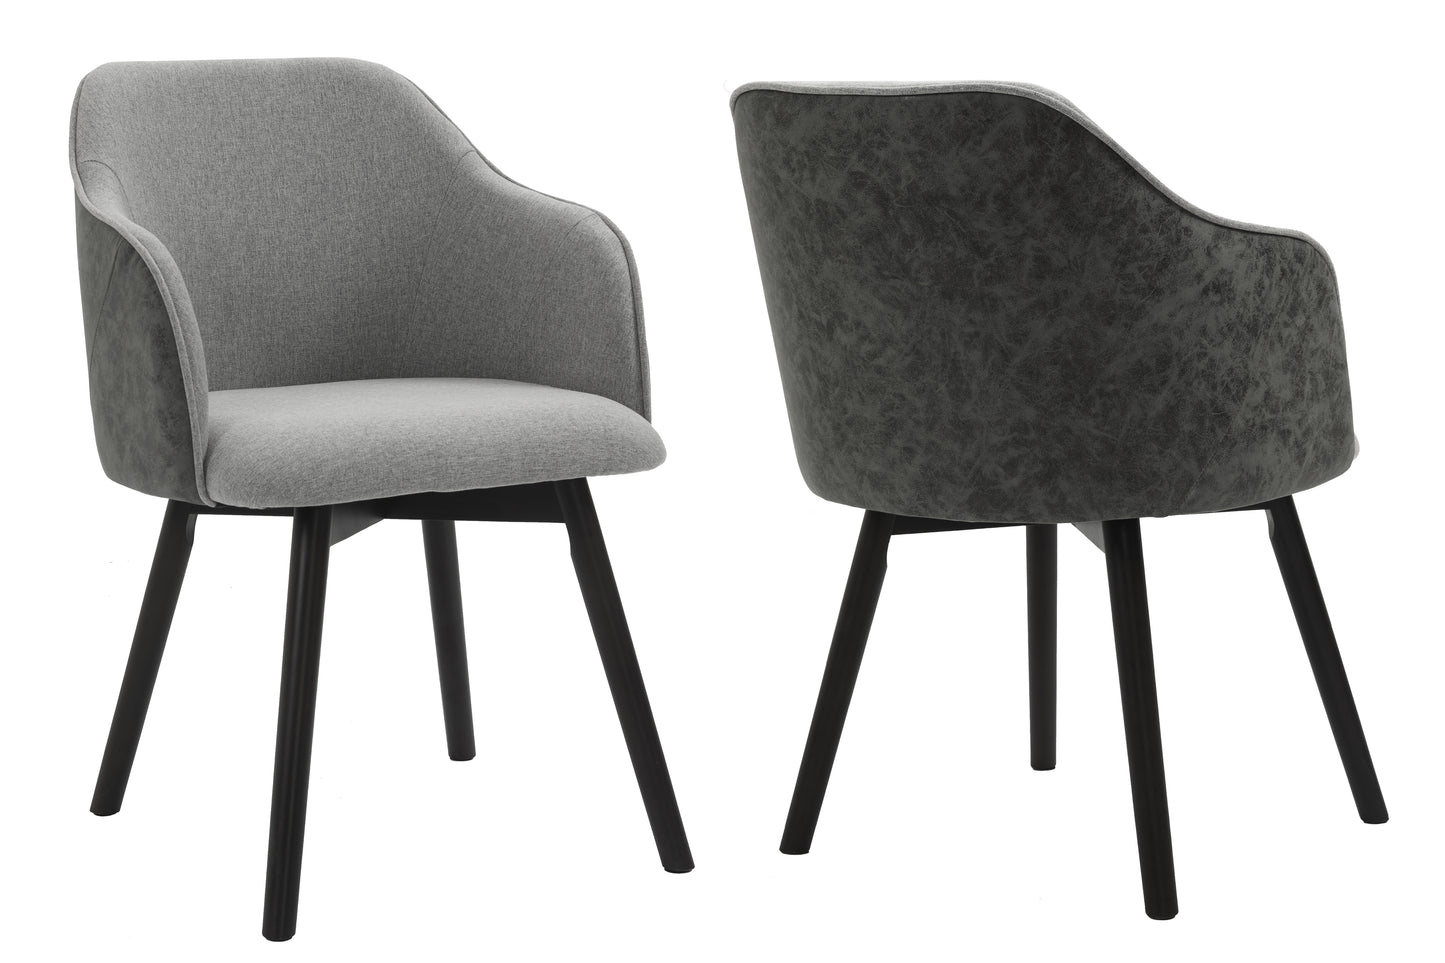 Upholstered dining armchairs - Leather/Fabric combination